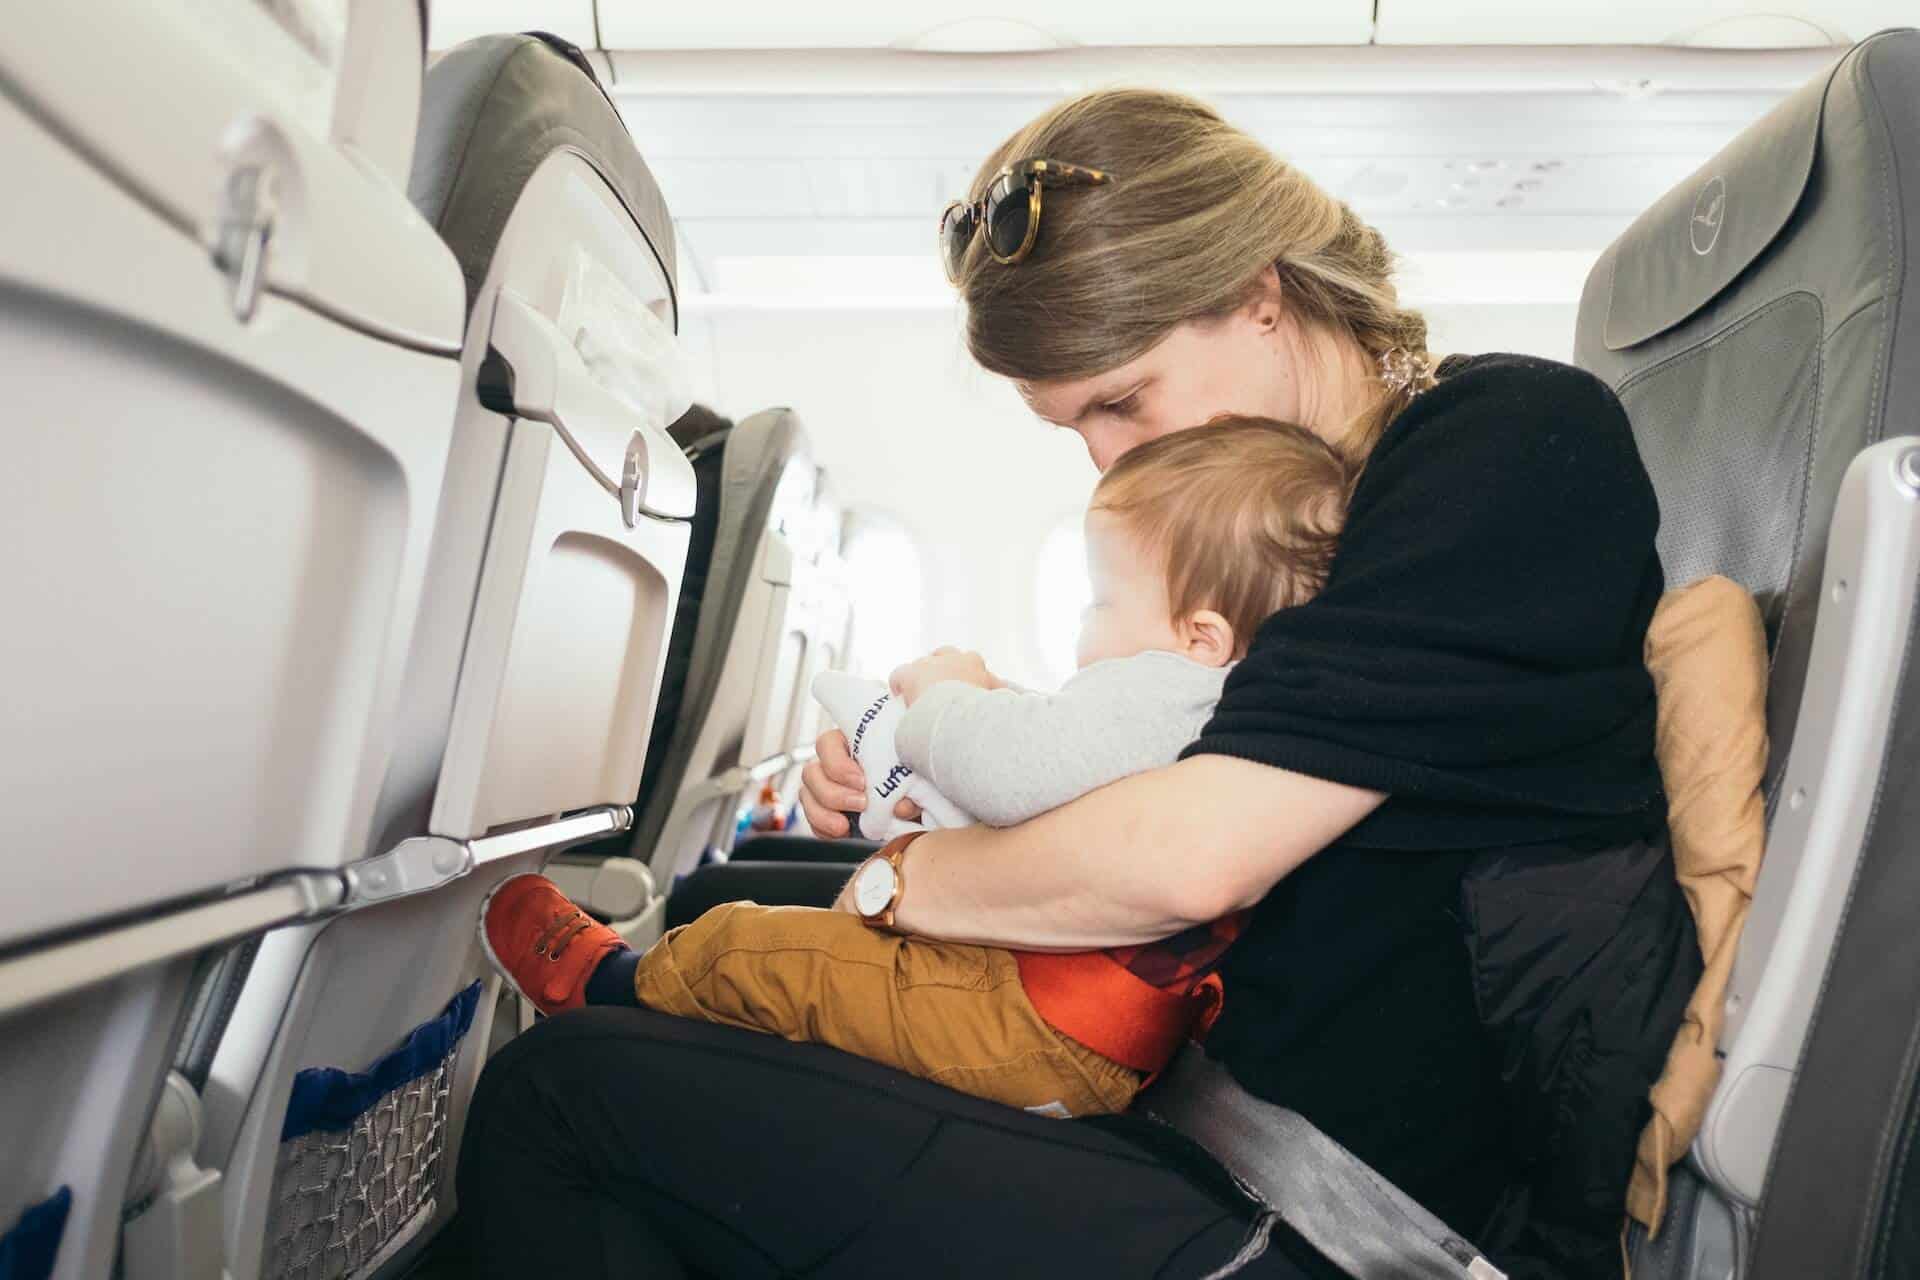 flying with kids